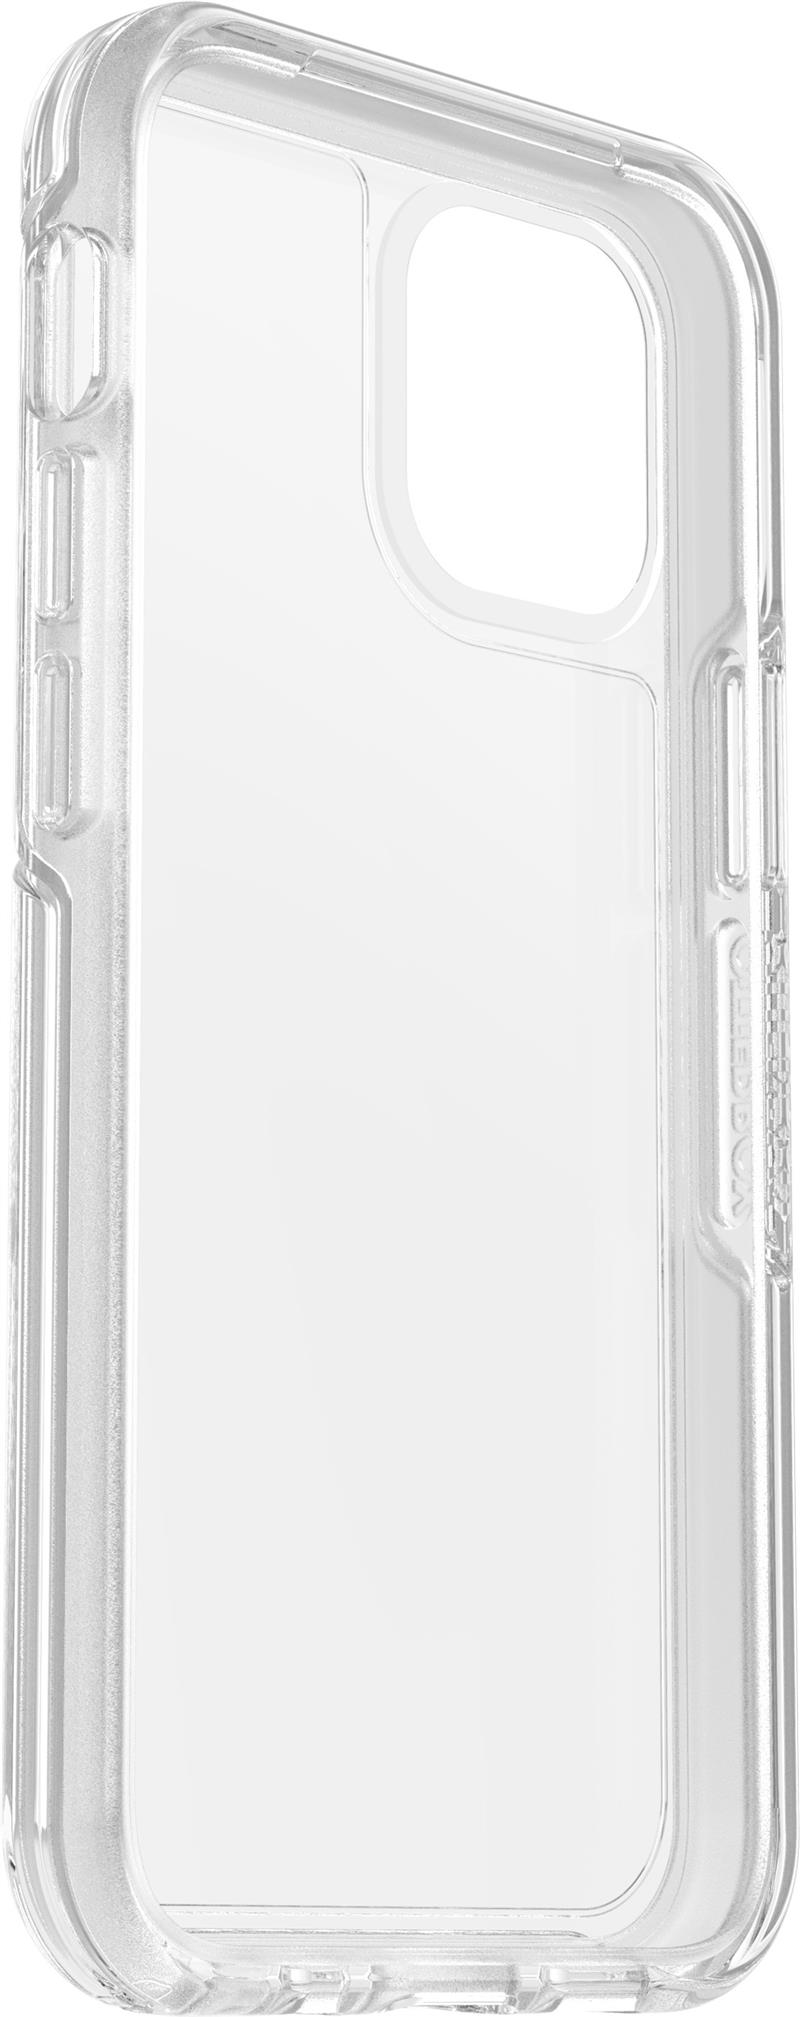 OtterBox Symmetry Clear Series voor Apple iPhone 12 mini, transparant